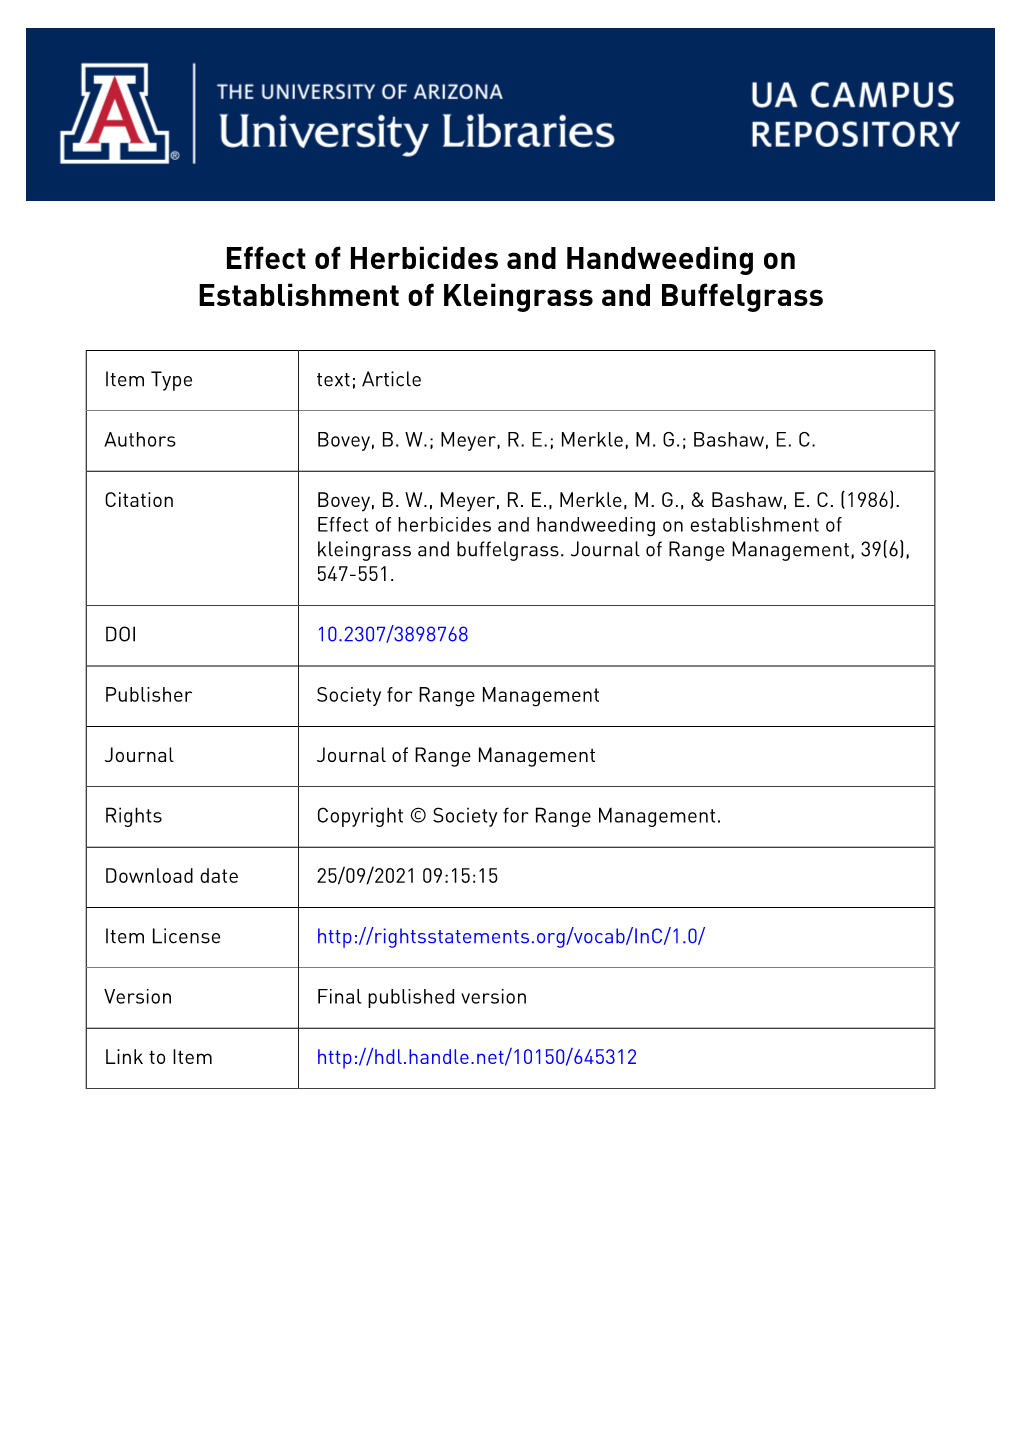 Effect of Herbicides and Handweeding on Establishment of Kleingrass and Buffelgrass